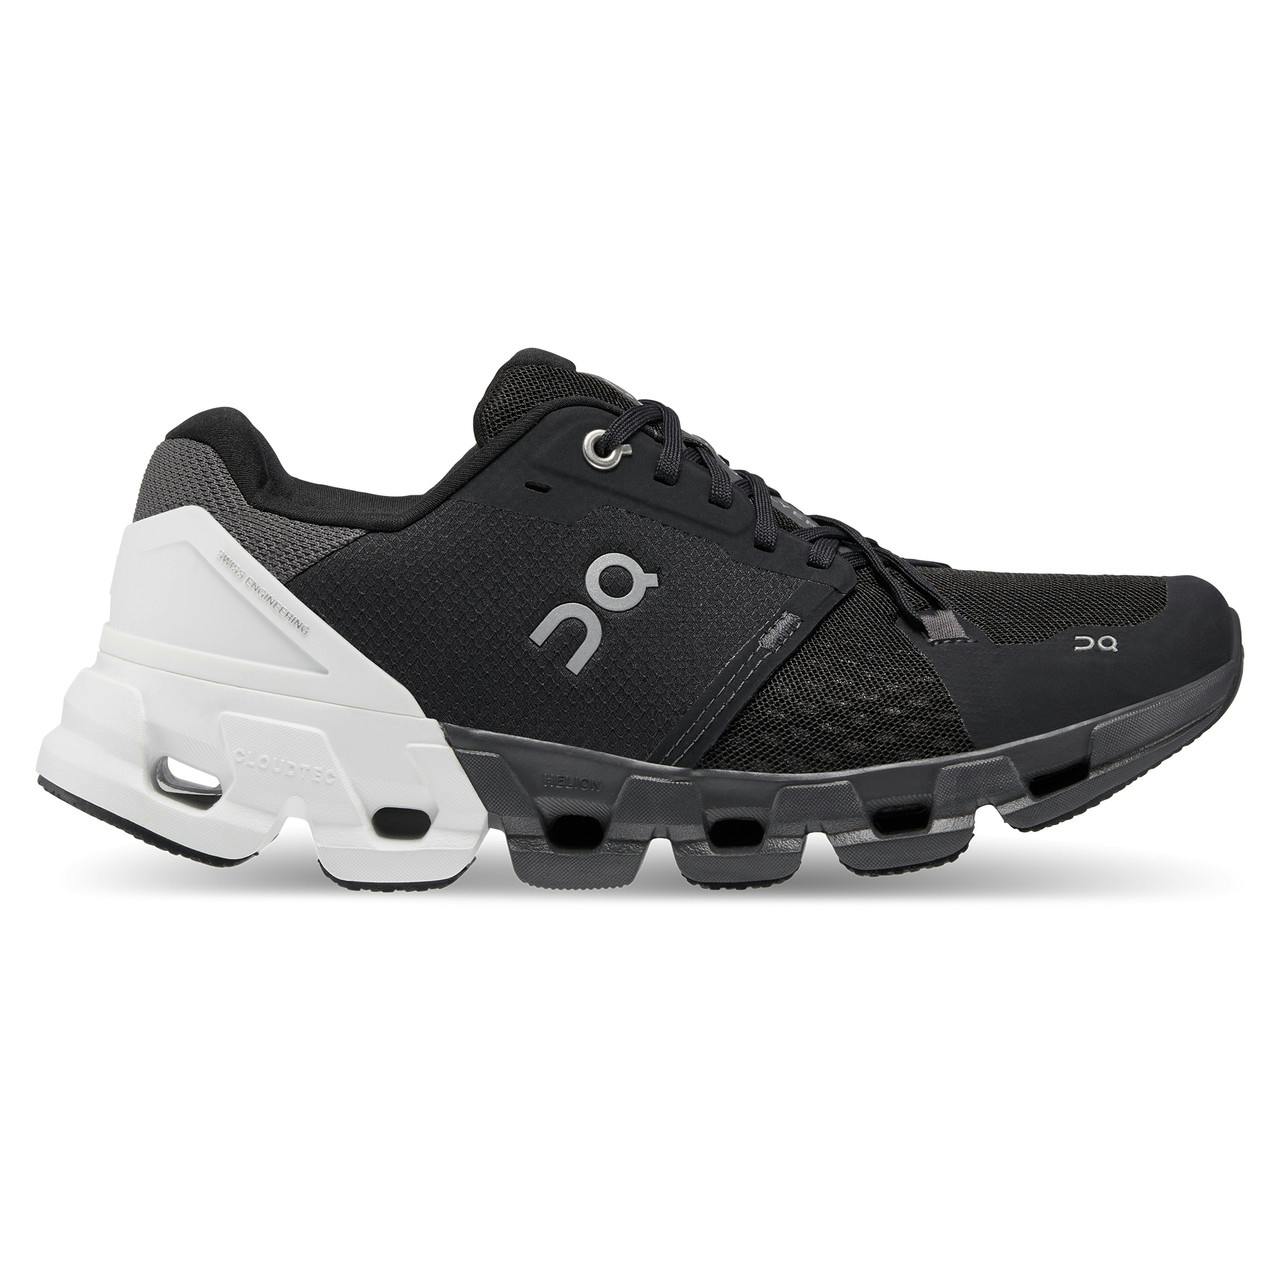 Cloudflyer Road Running Shoes Black/White